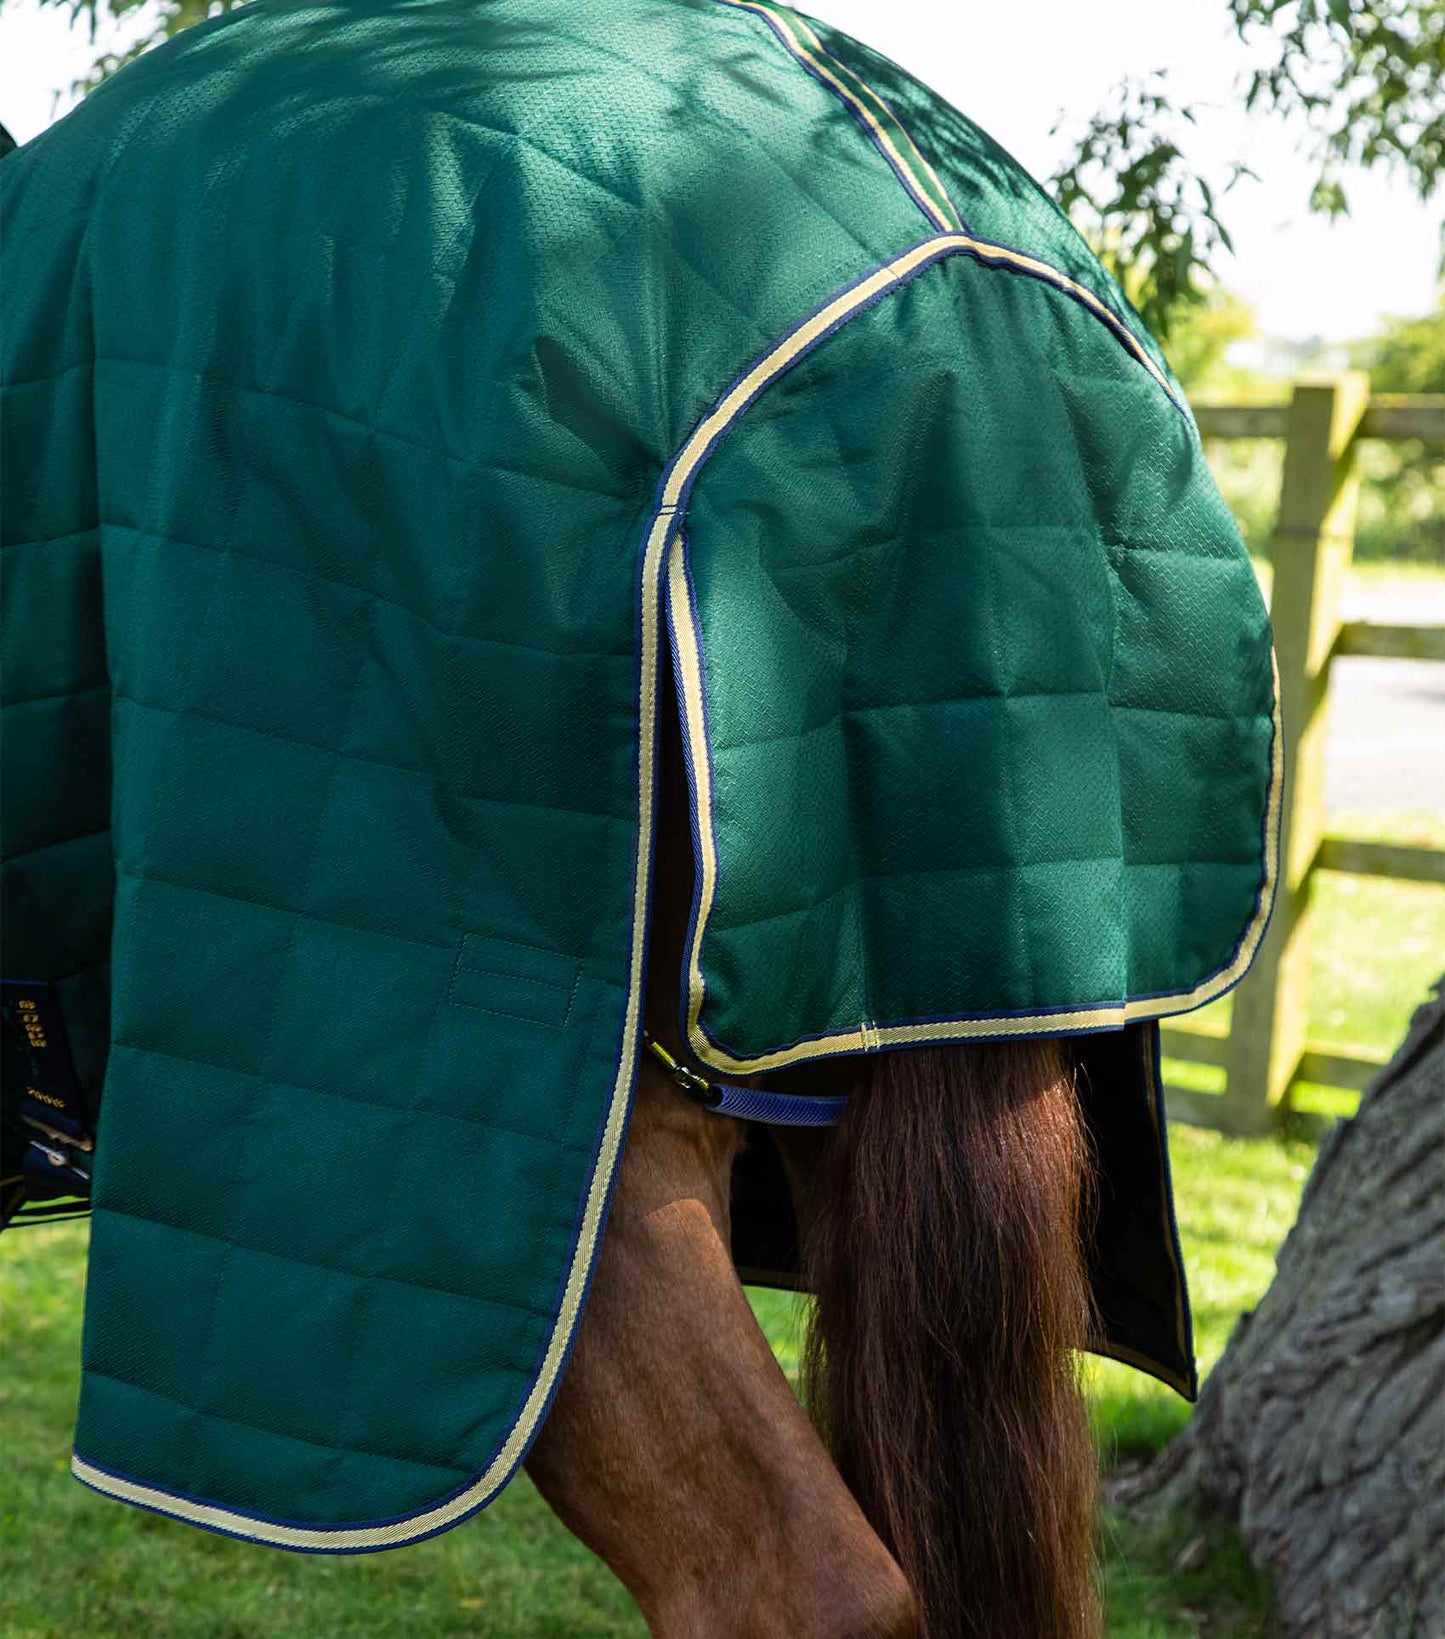 Premier Equine Lucanta 200g Stable Rug with Neck Cover